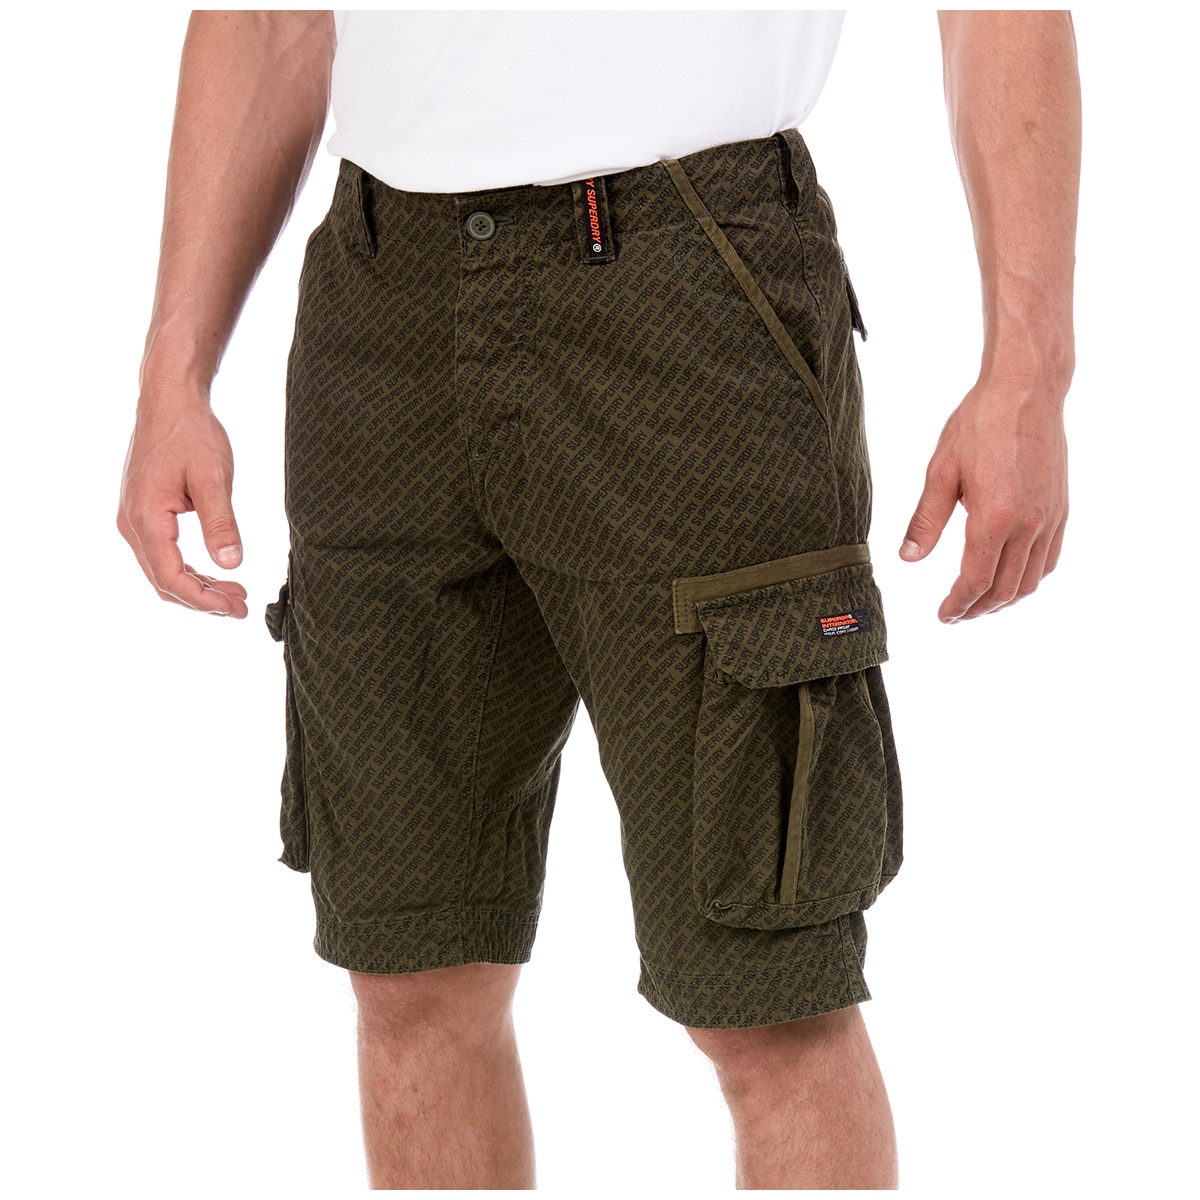 Superdry core cargo lite shorts - Olive